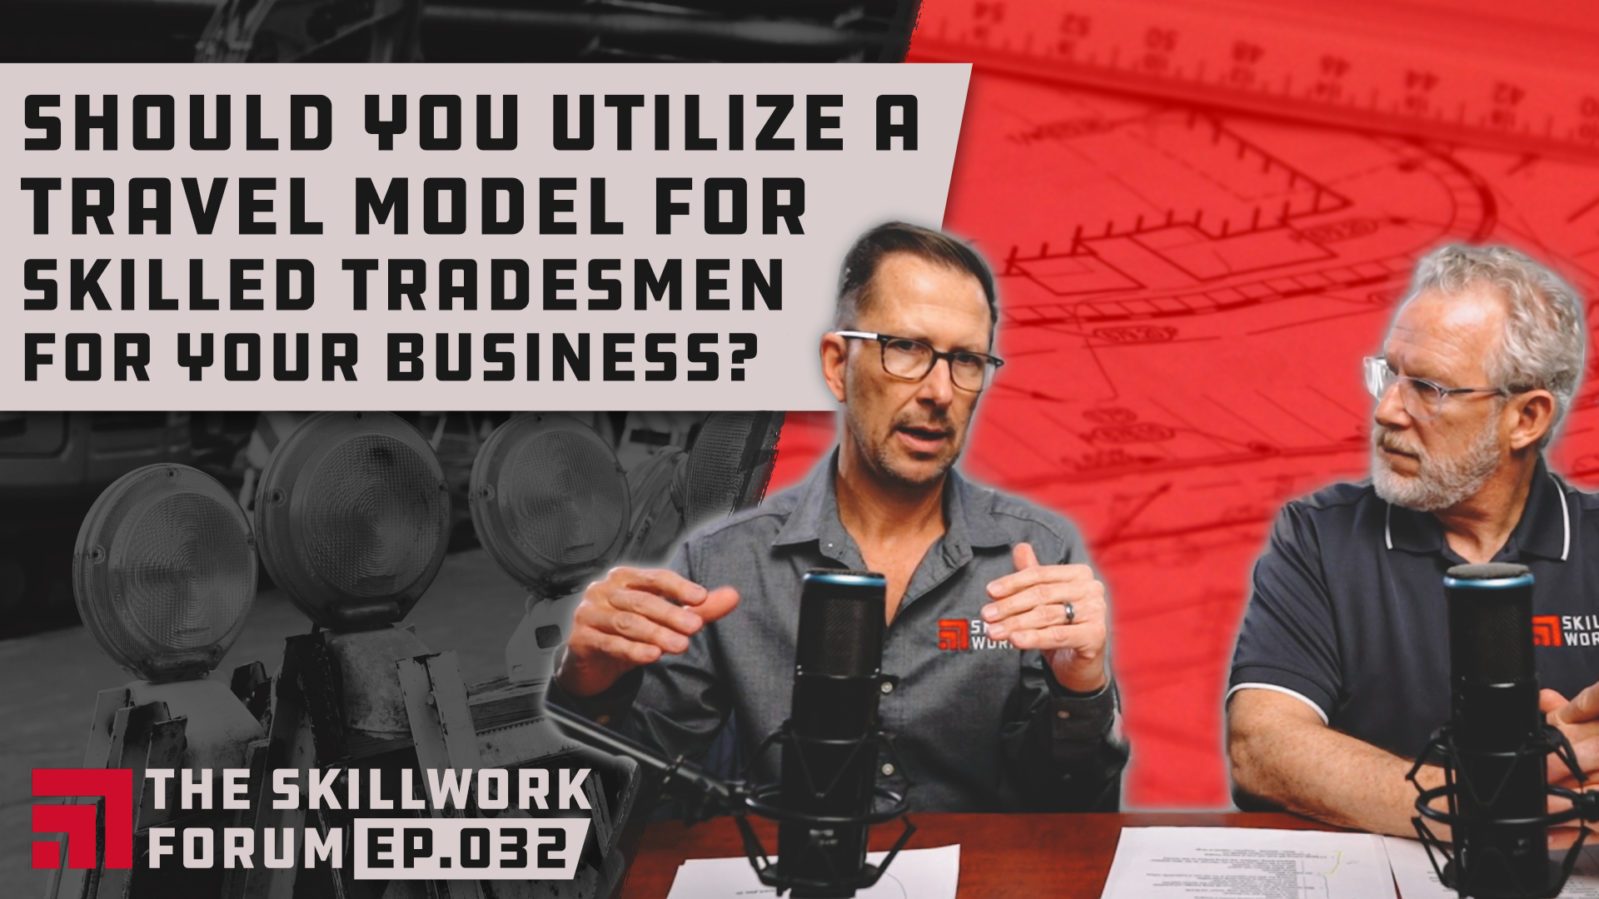 Why Utilize a Travel Model for Skilled Tradesmen for Your Business? (COMPANY Perspective)